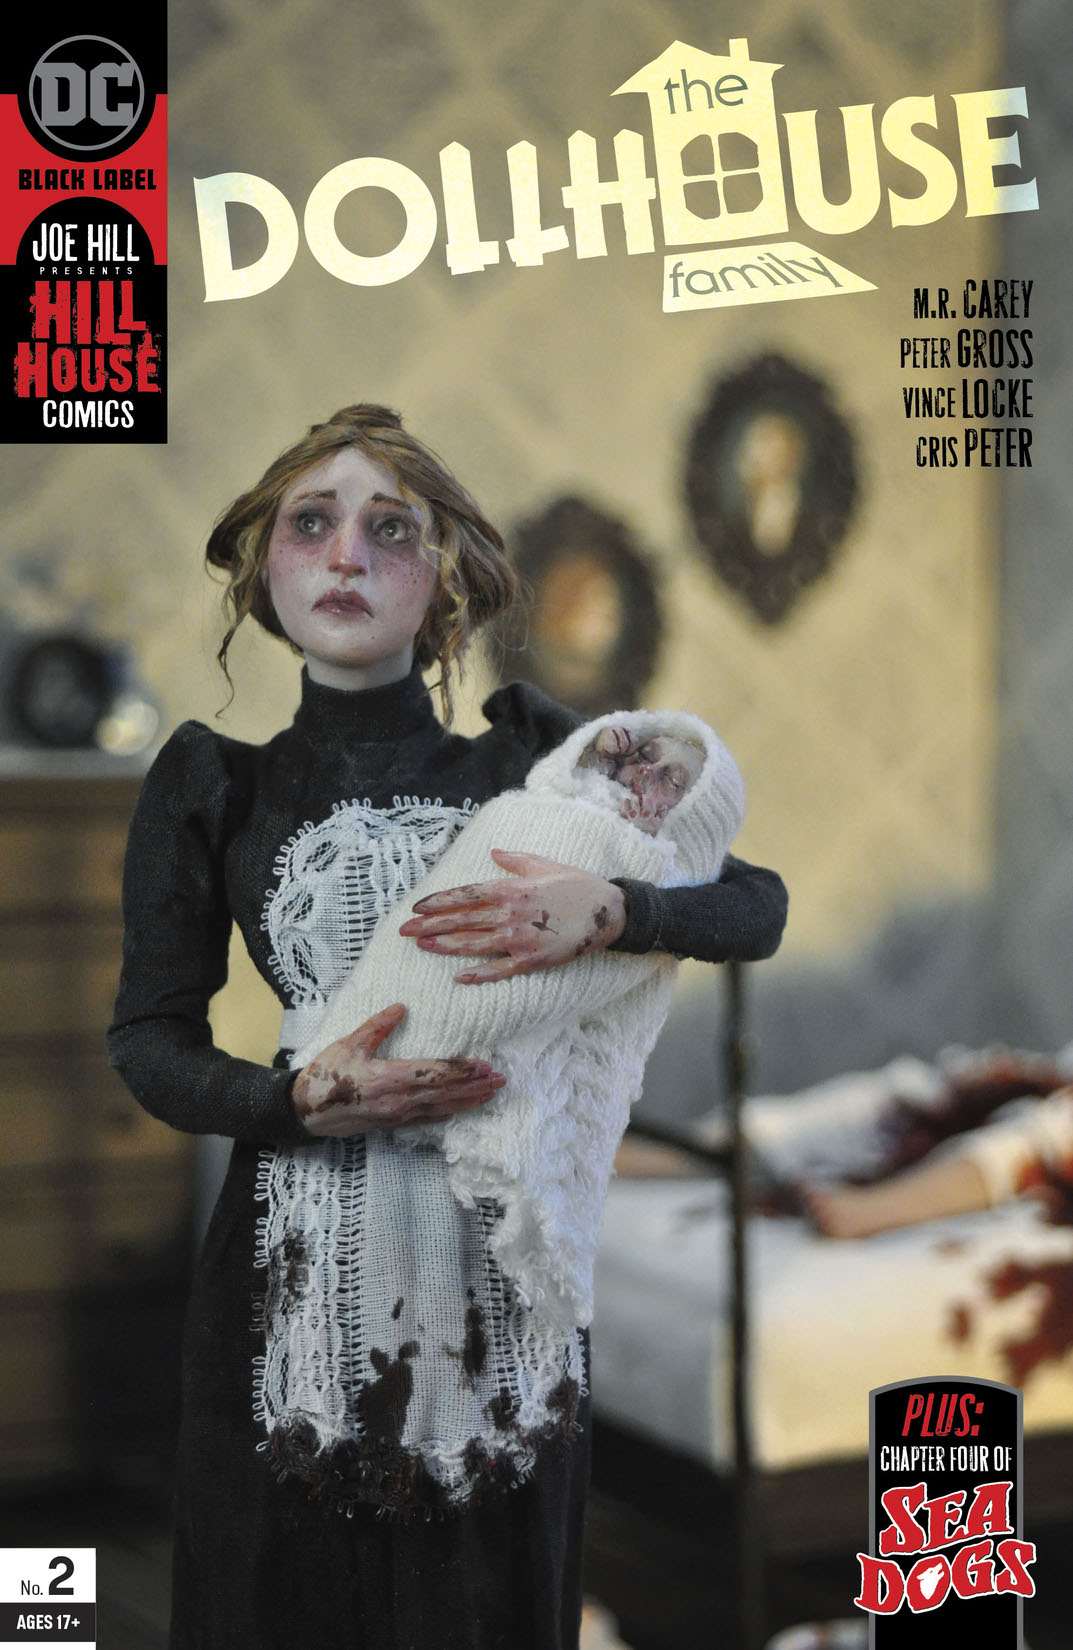 The Dollhouse Family #2 preview images